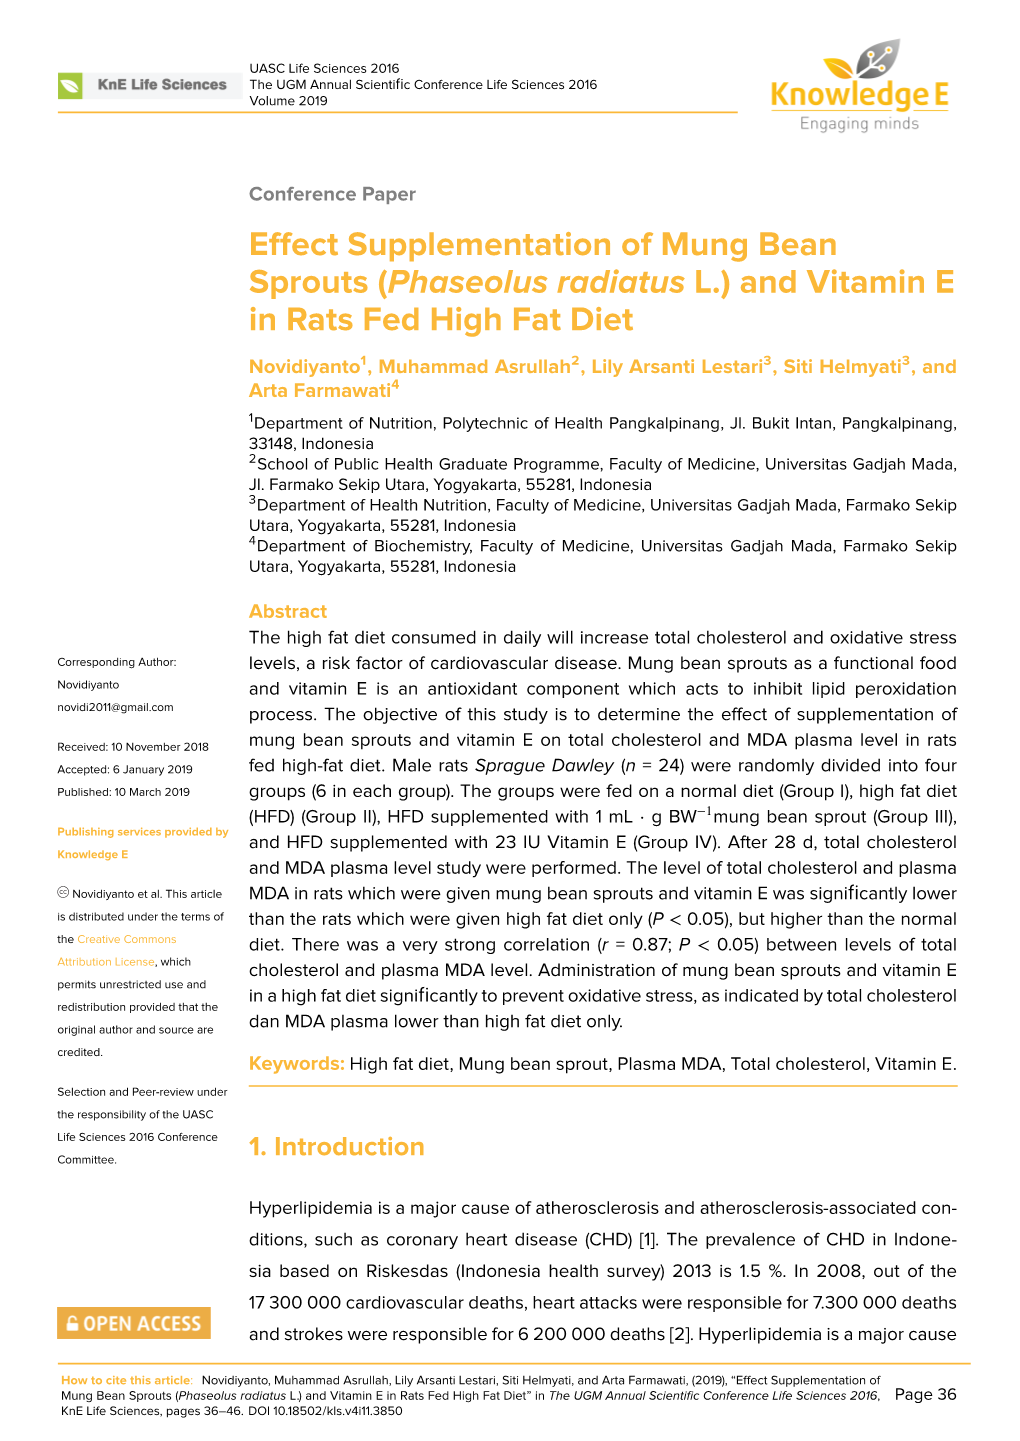 Effect Supplementation of Mung Bean Sprouts